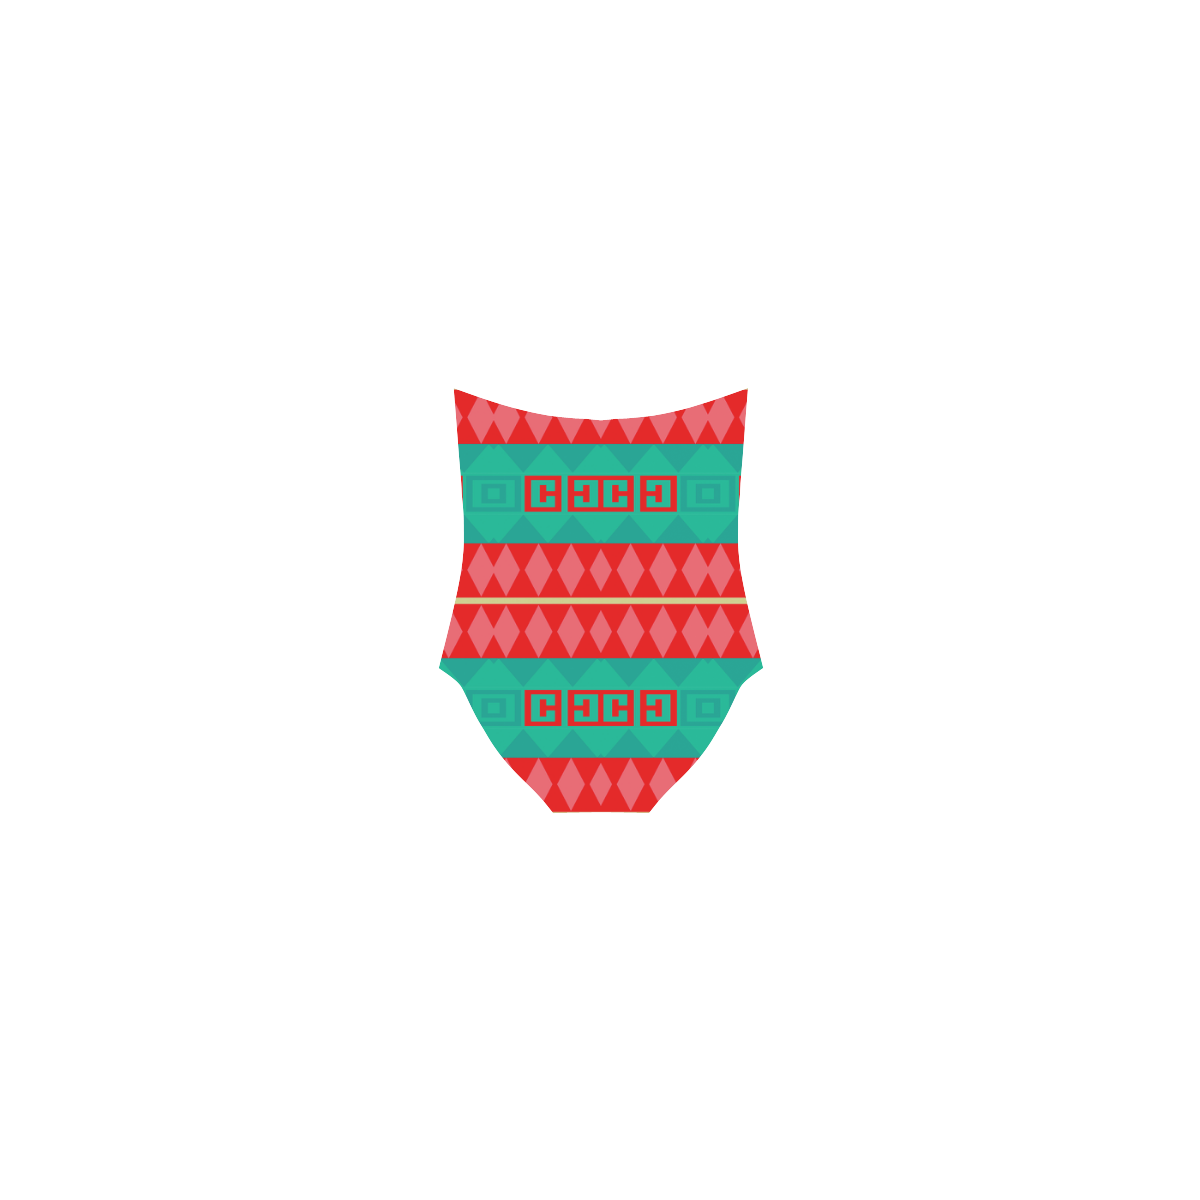 Rhombus stripes and other shapes Strap Swimsuit ( Model S05)